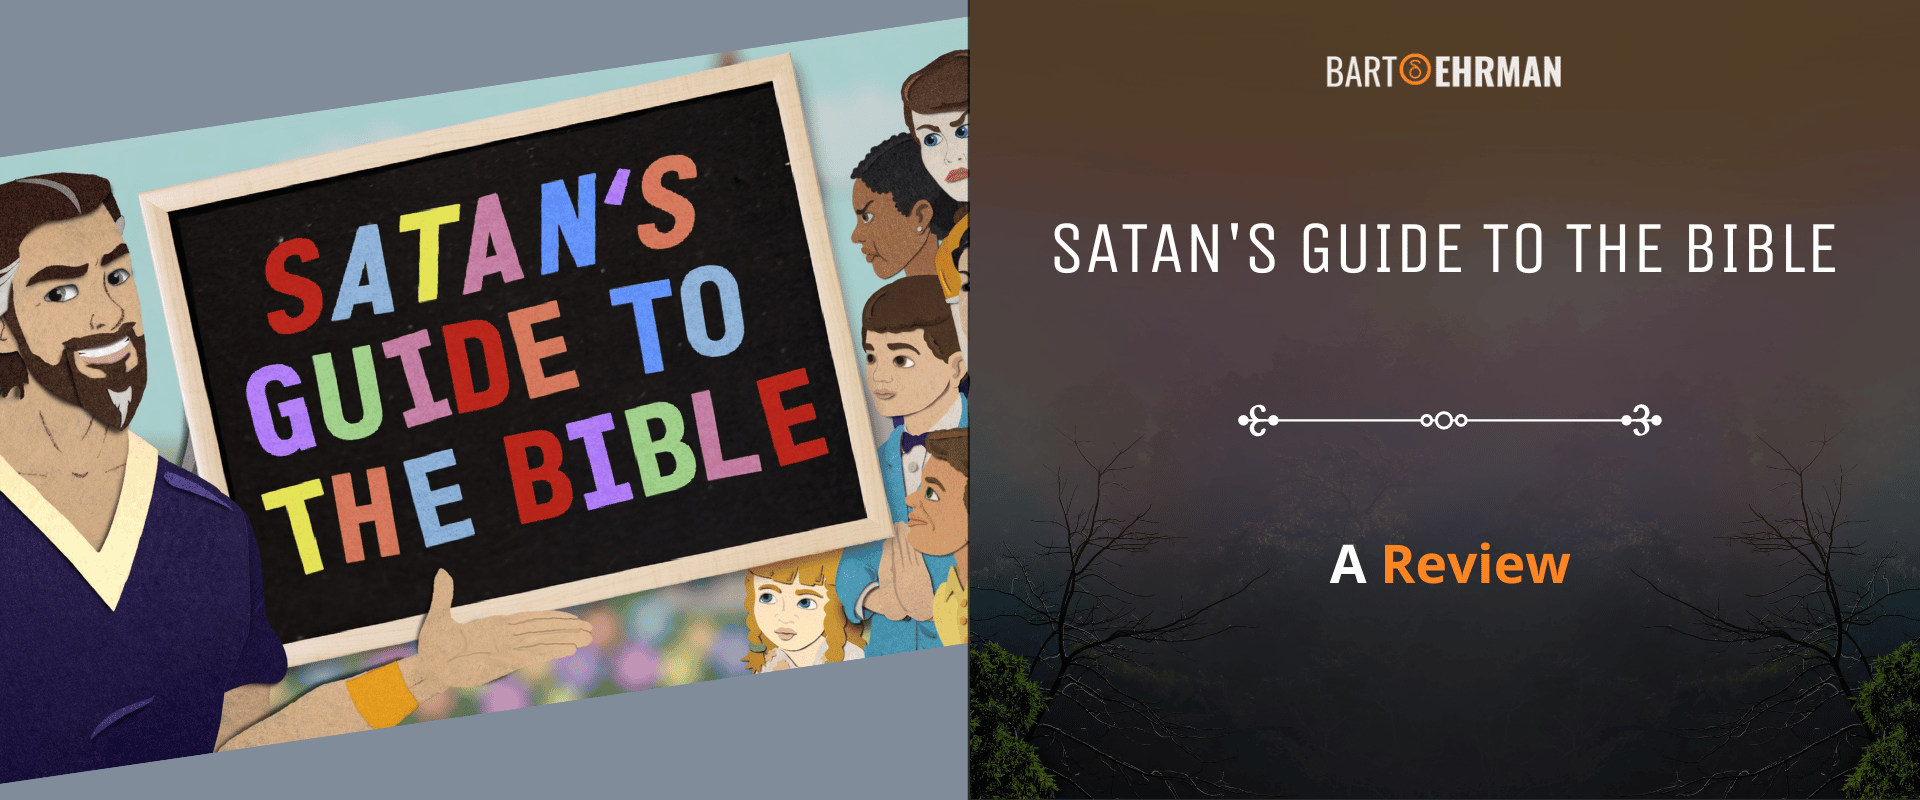 Satans Guide to the Bible Review